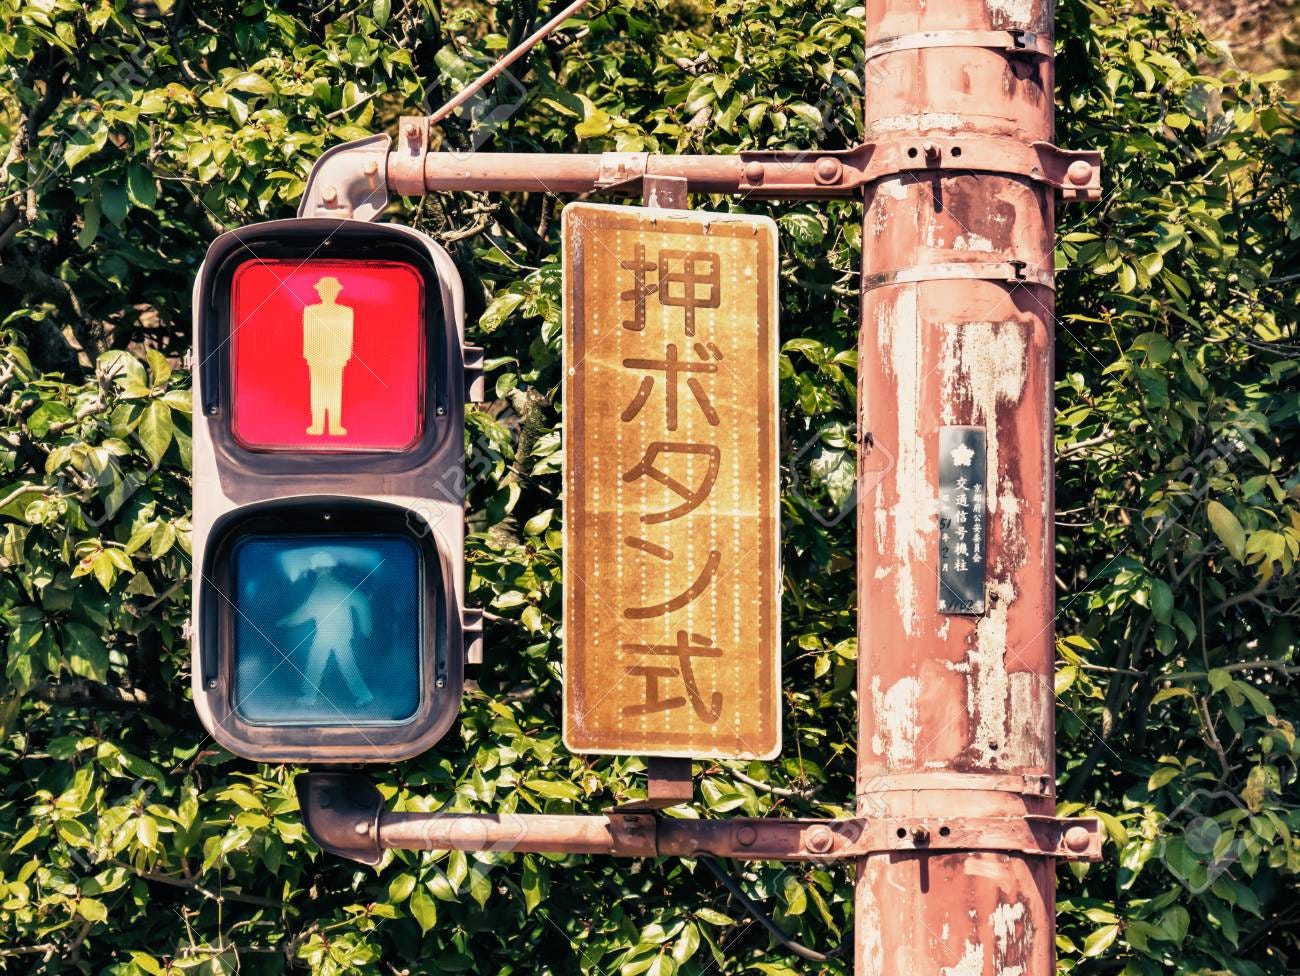 Traffic Lights In Kyoto, Japan Stock Photo, Picture And Royalty Free Image.  Image 68734966.